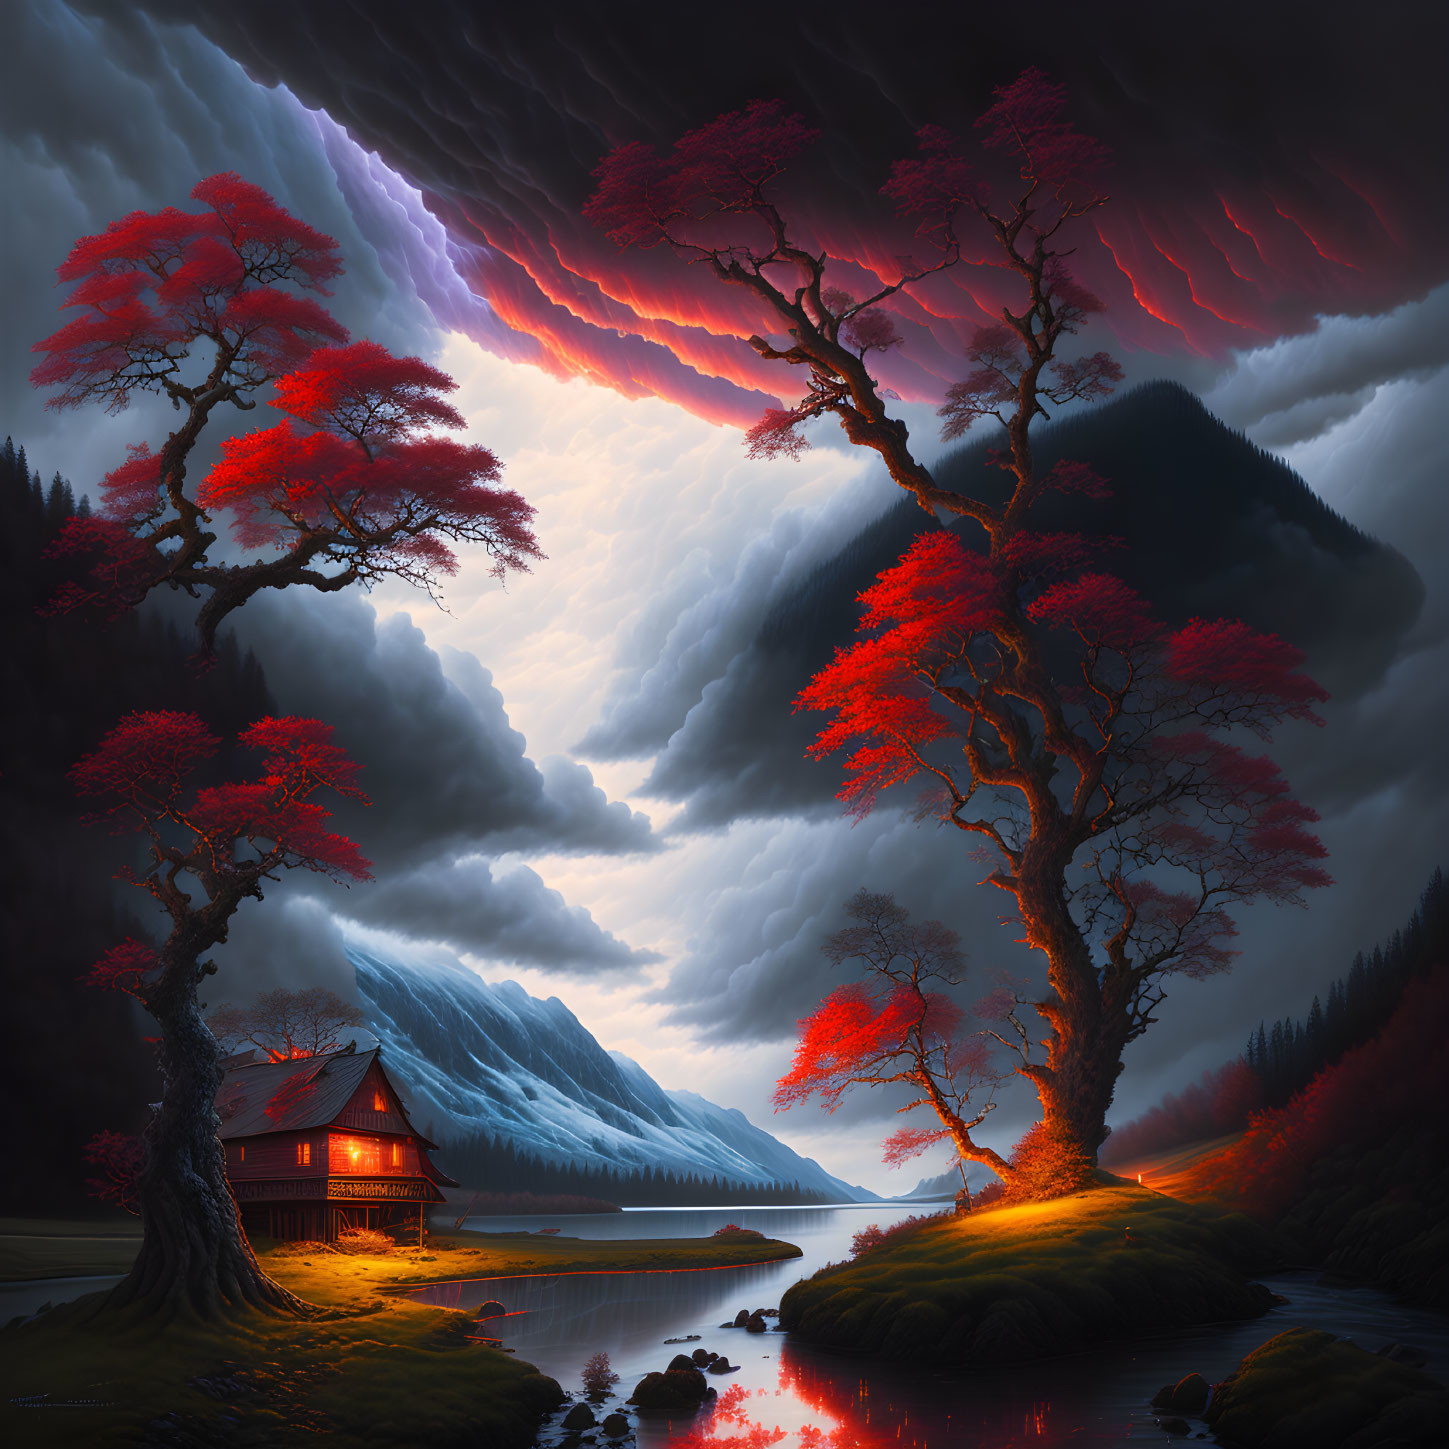 Fantasy landscape with red foliage, cabin by river, mountains, twilight sky